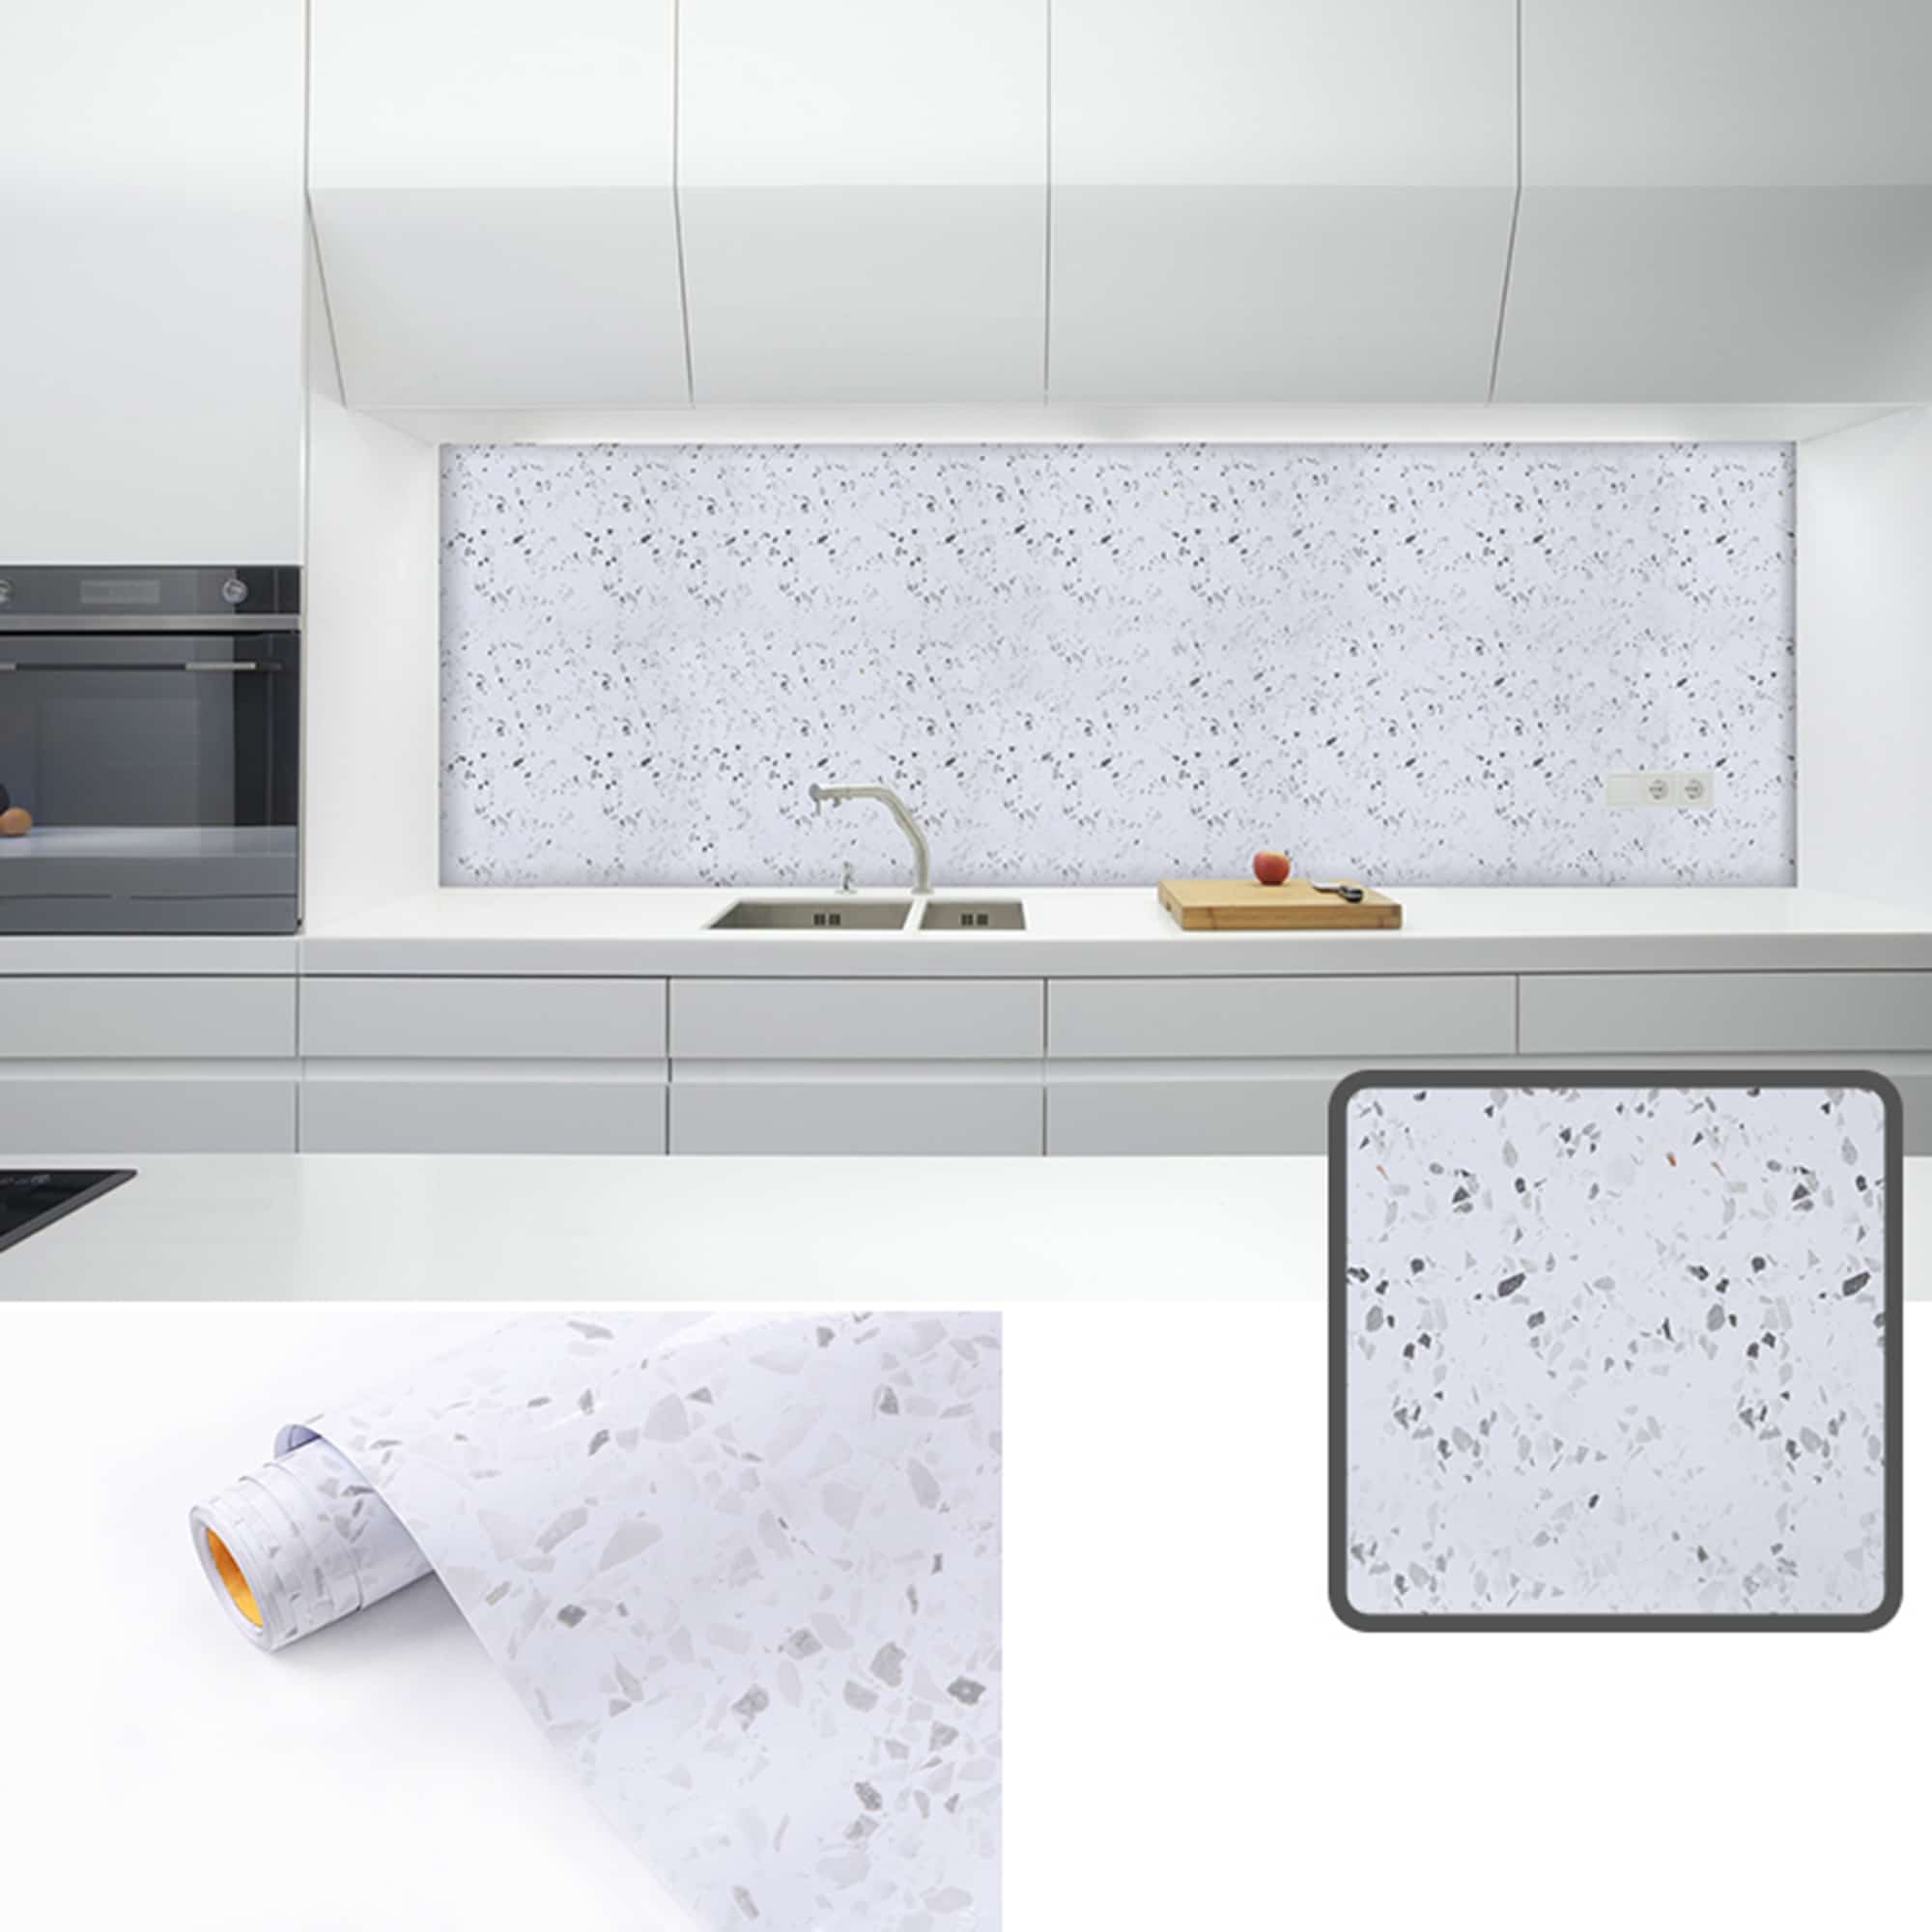 Black Grey Abstract Self Adhesive Contact Paper L And Stick Modern Wallpaper For Kitchen Backsplash Countertop Cabinets Drawers Shelf Liner 16 Ft X 24 In 5m 60cm Dundee Deco